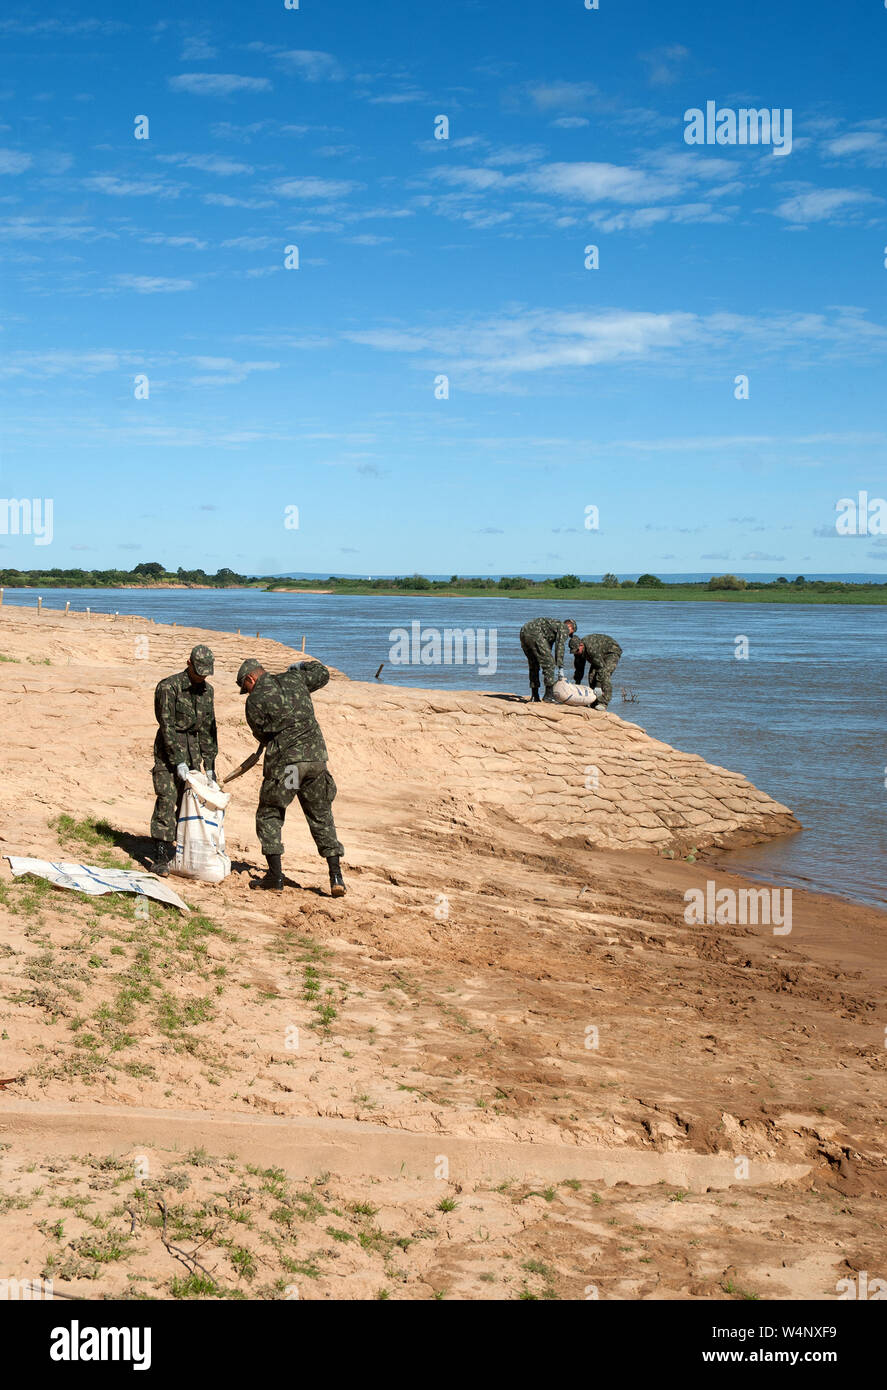 Bahia, September 23, 2006. Army soldiers making sandbag barriers to try to contain the landslide on the banks of the São Francisco river in the wester Stock Photo